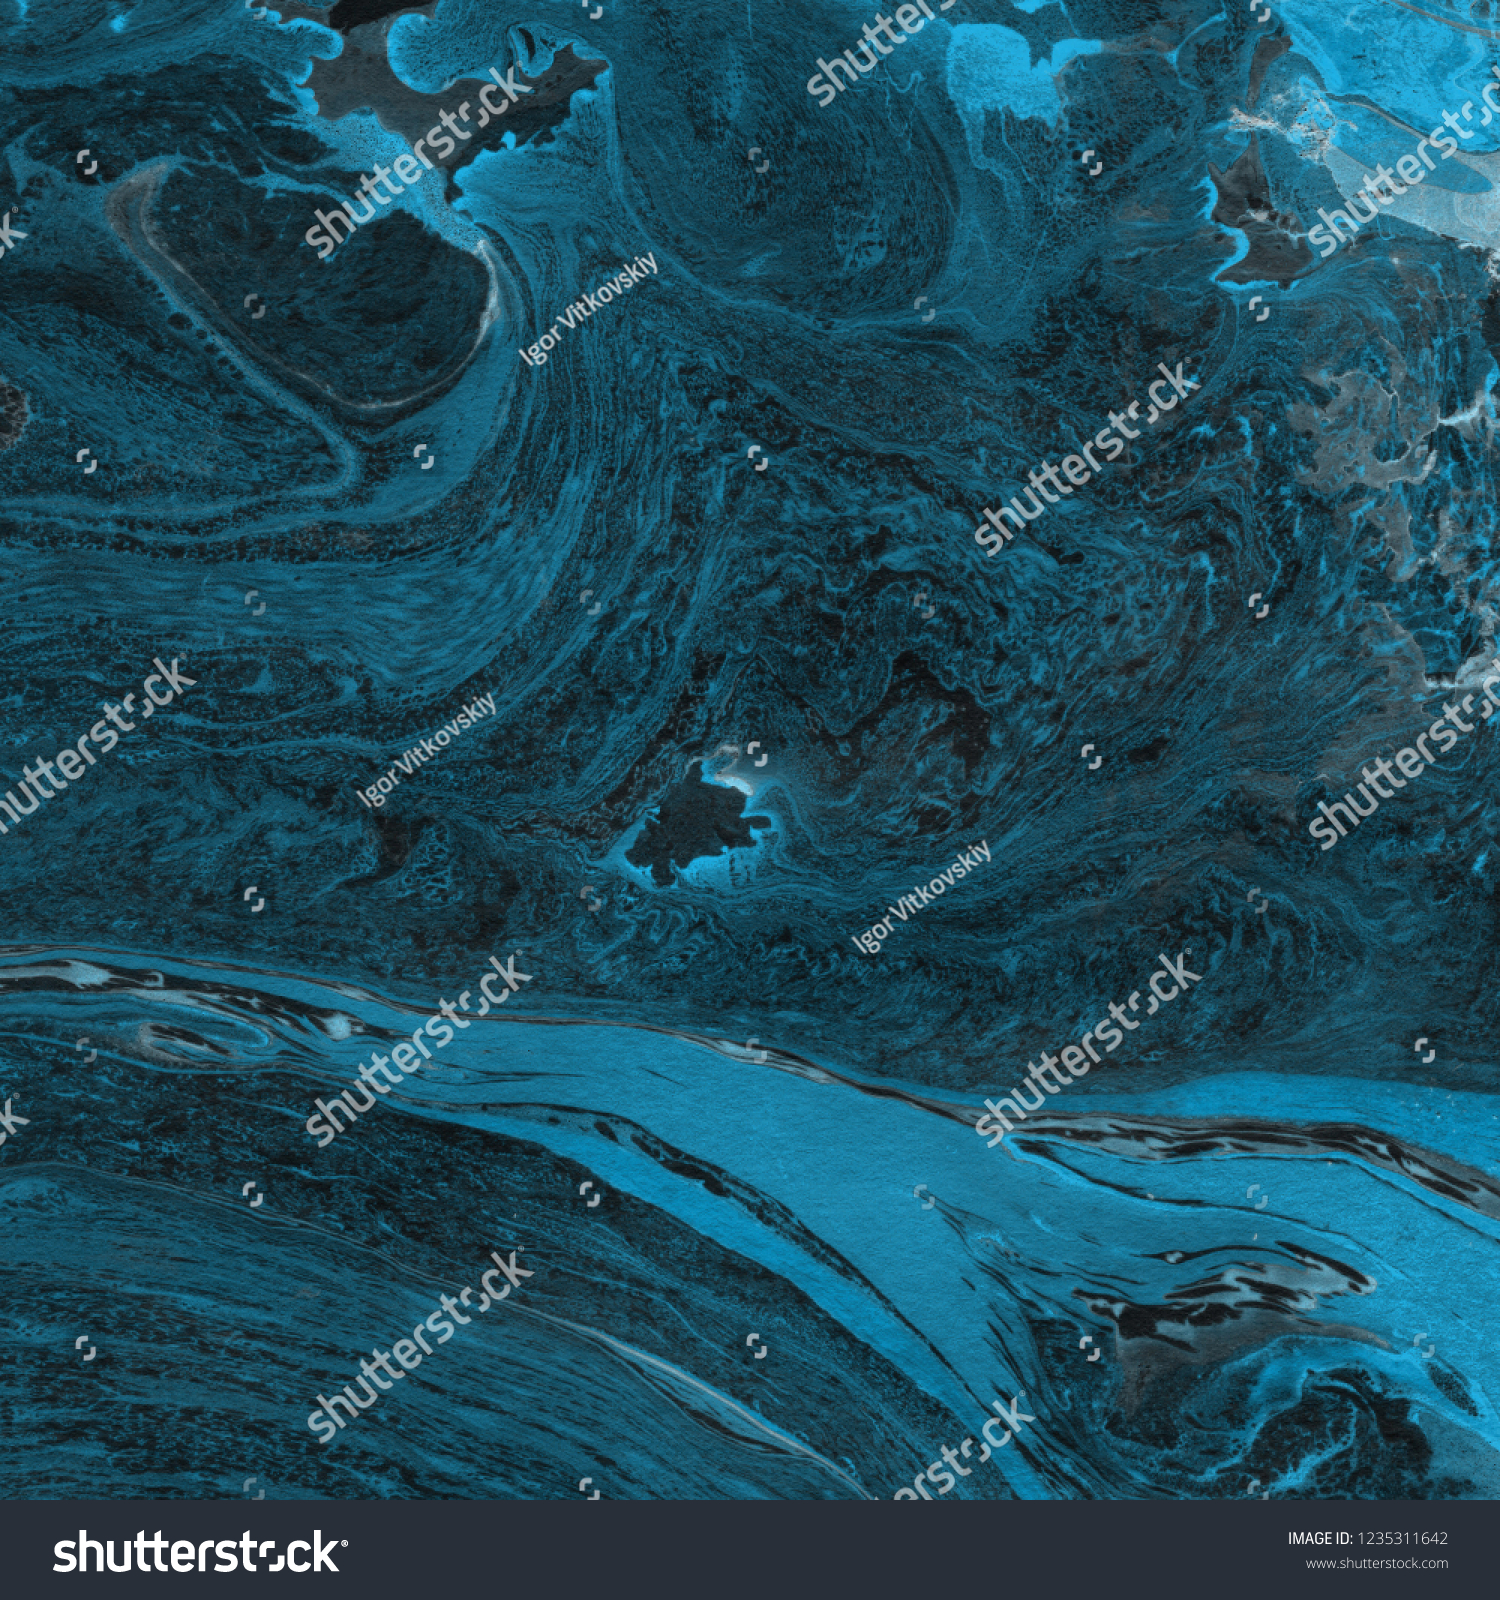  Winter blue marble ink paper textures on dark watercolor background. Chaotic abstract organic design. Bath bomb waves. #1235311642